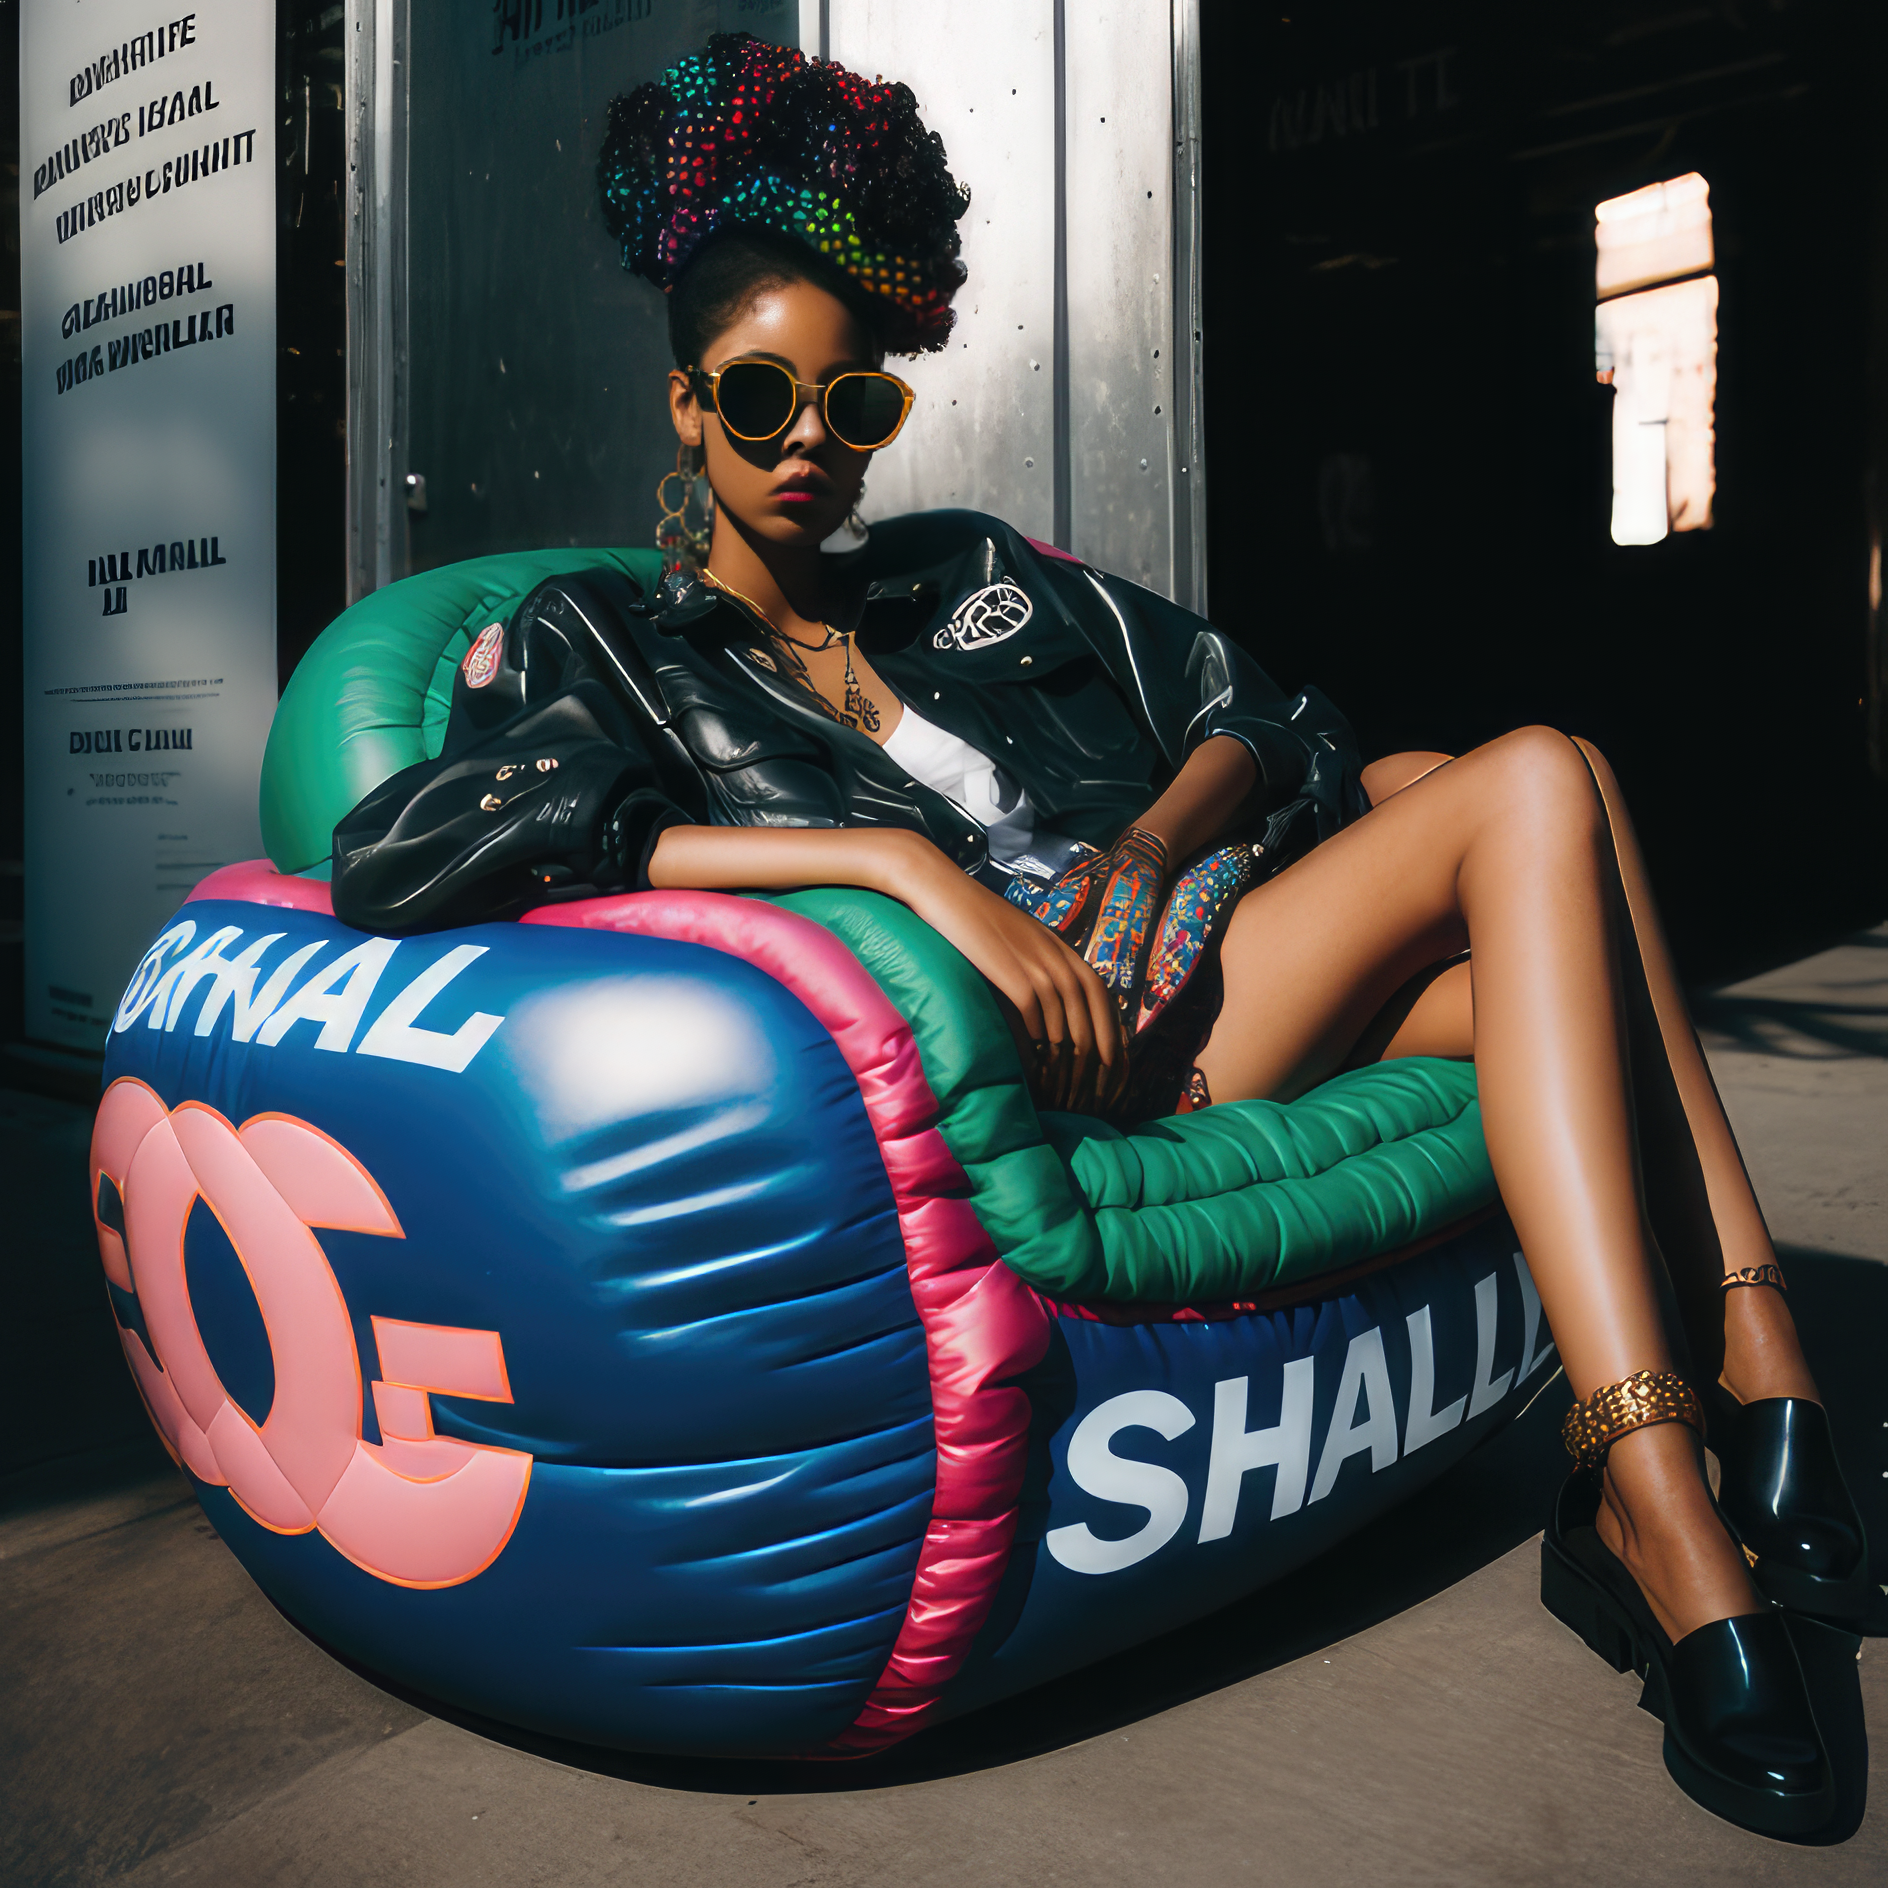 tonycncp_Heavily_branded_Chanel_Luxury_inflatable_chair_streetw_9bd1366d-4f34-4979-8f23-ed8da83db119-gigapixel-standard-scale-4_00x.png